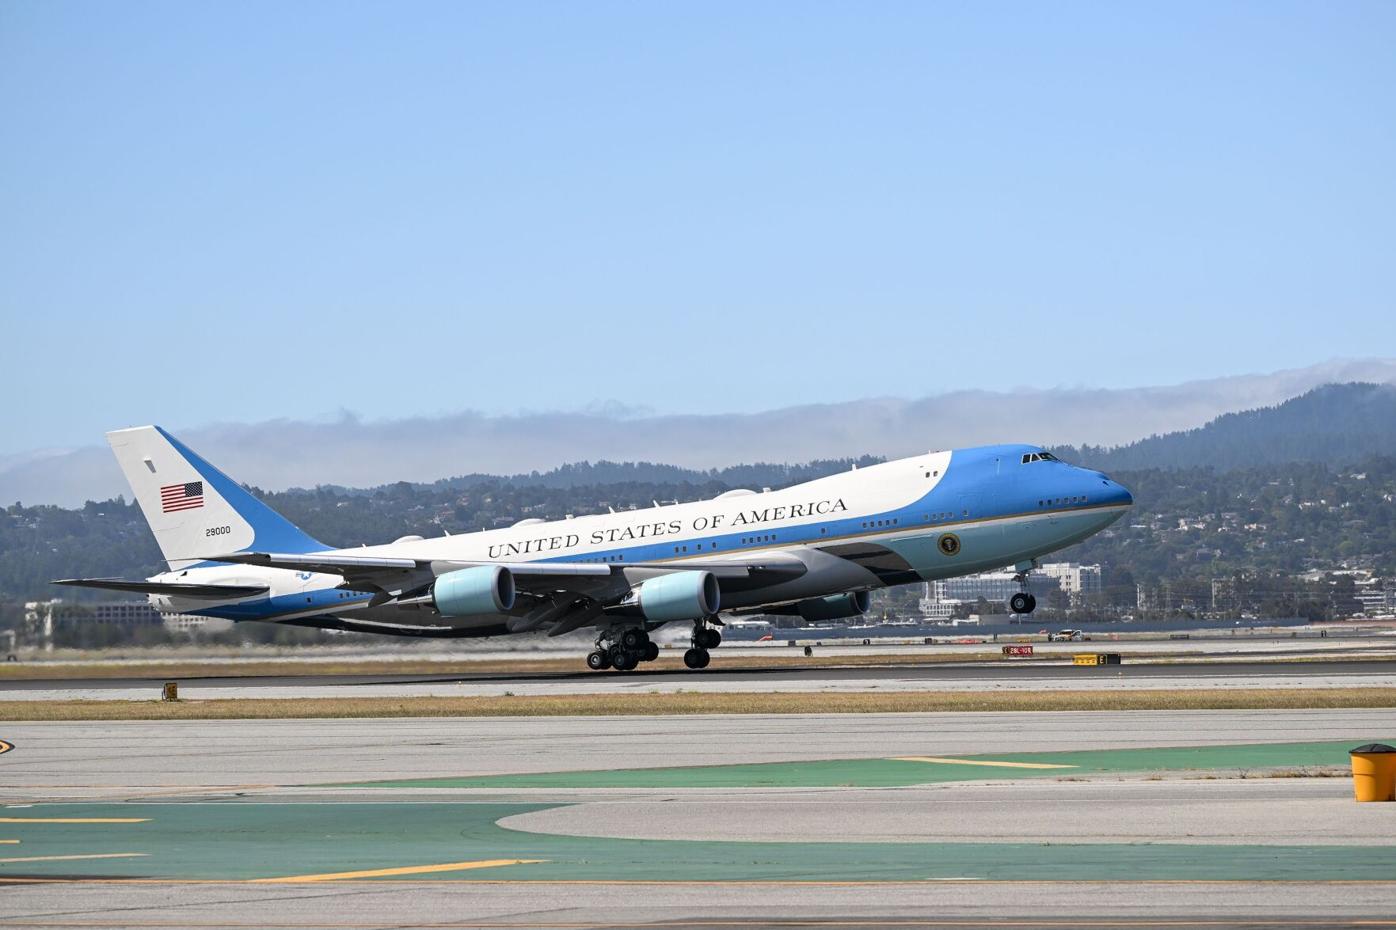 Boeing losses mount on troubled Air Force One program